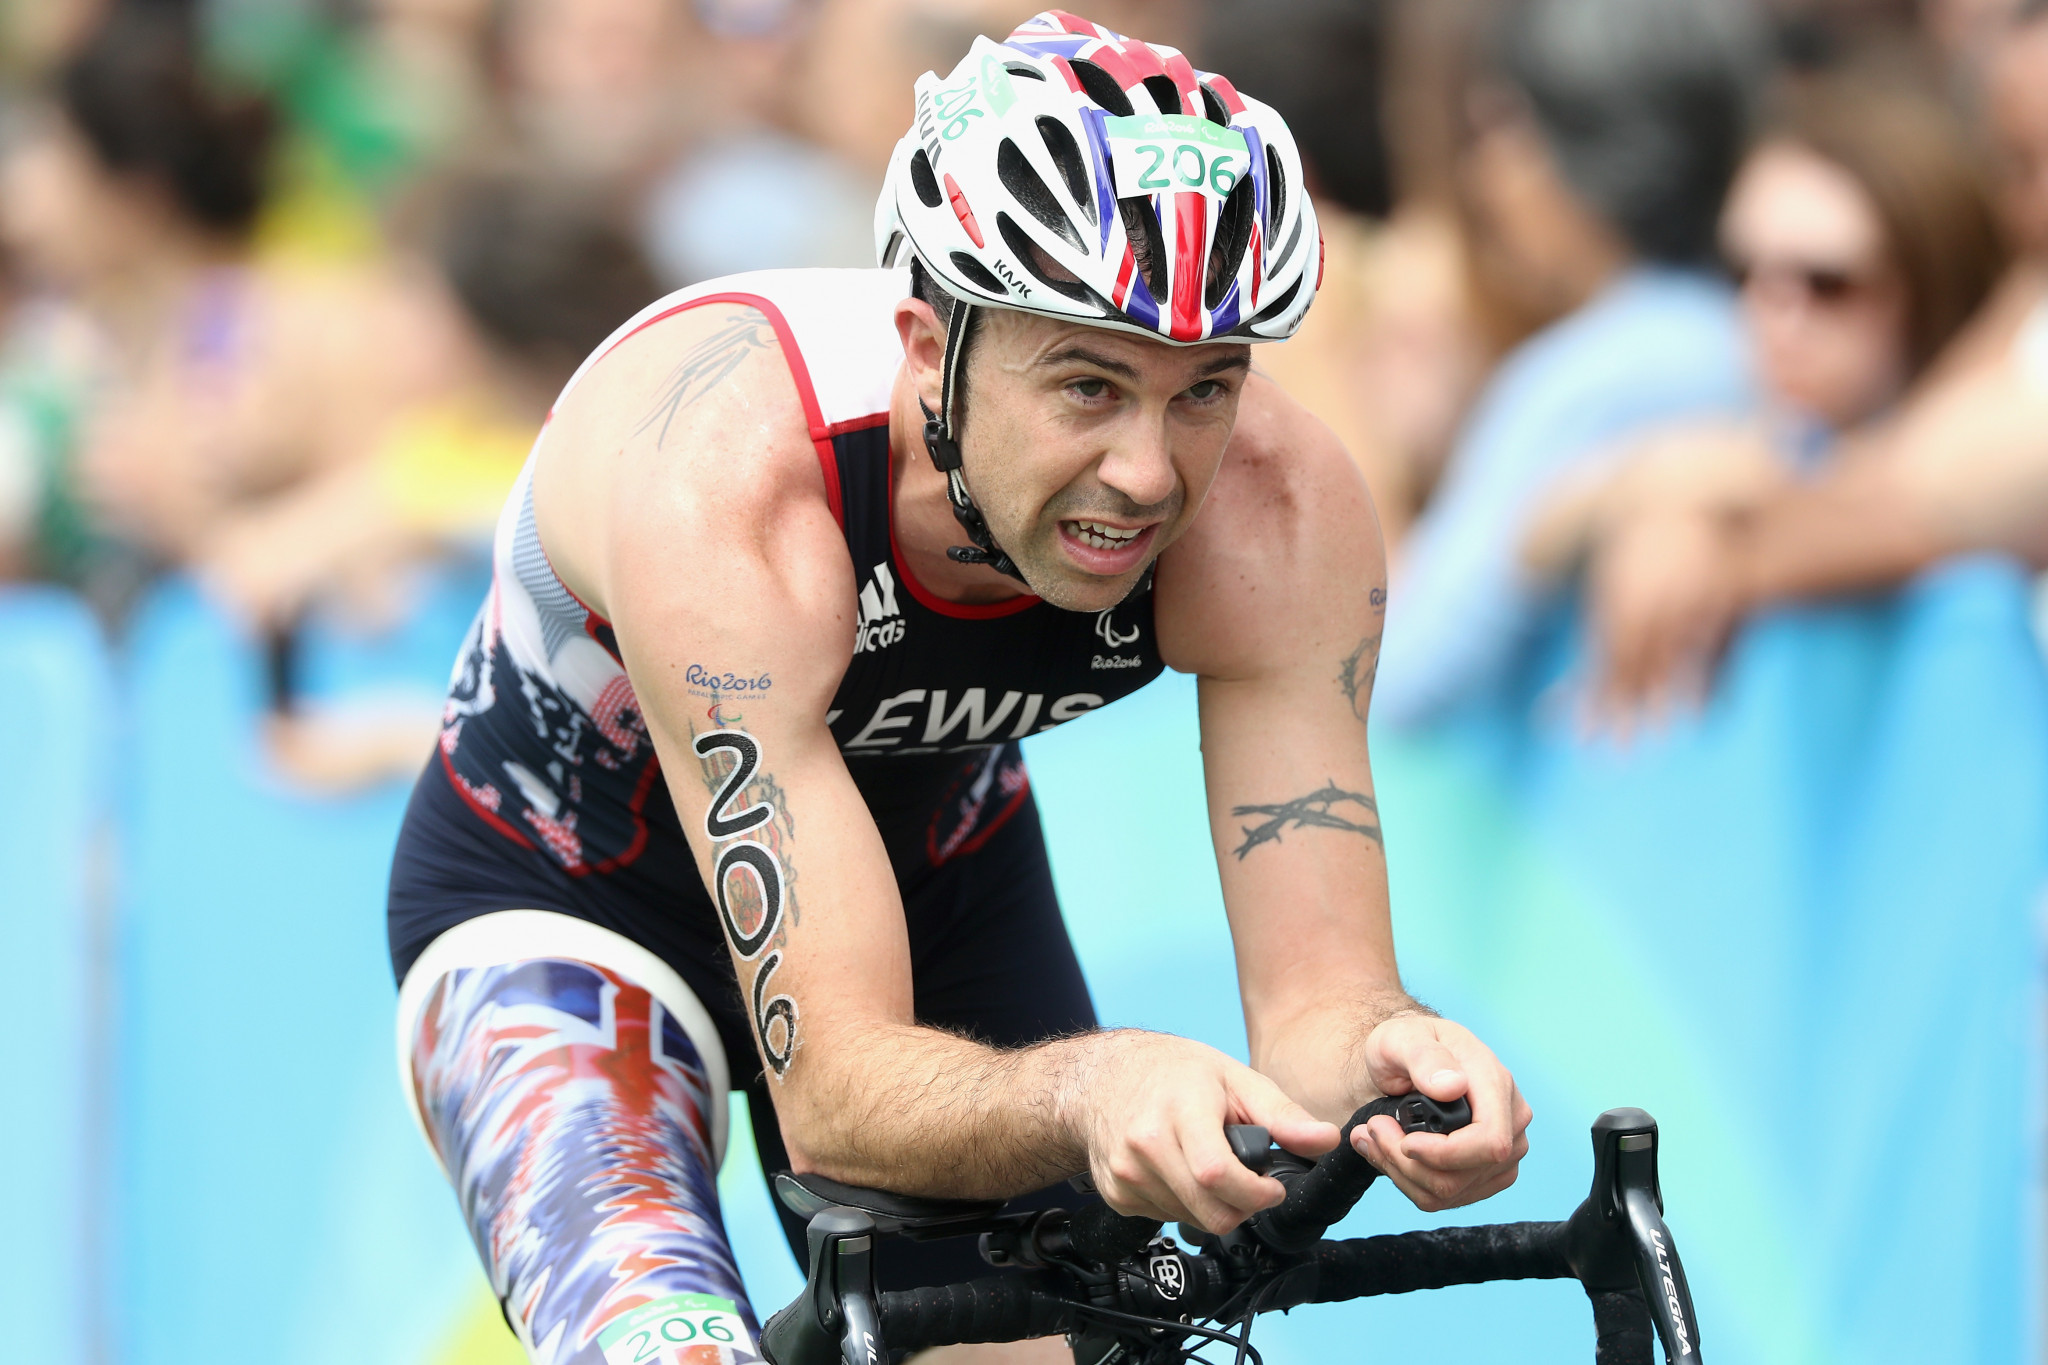 Lewis aiming to mark successful season with victory at season-ending Paratriathlon World Cup